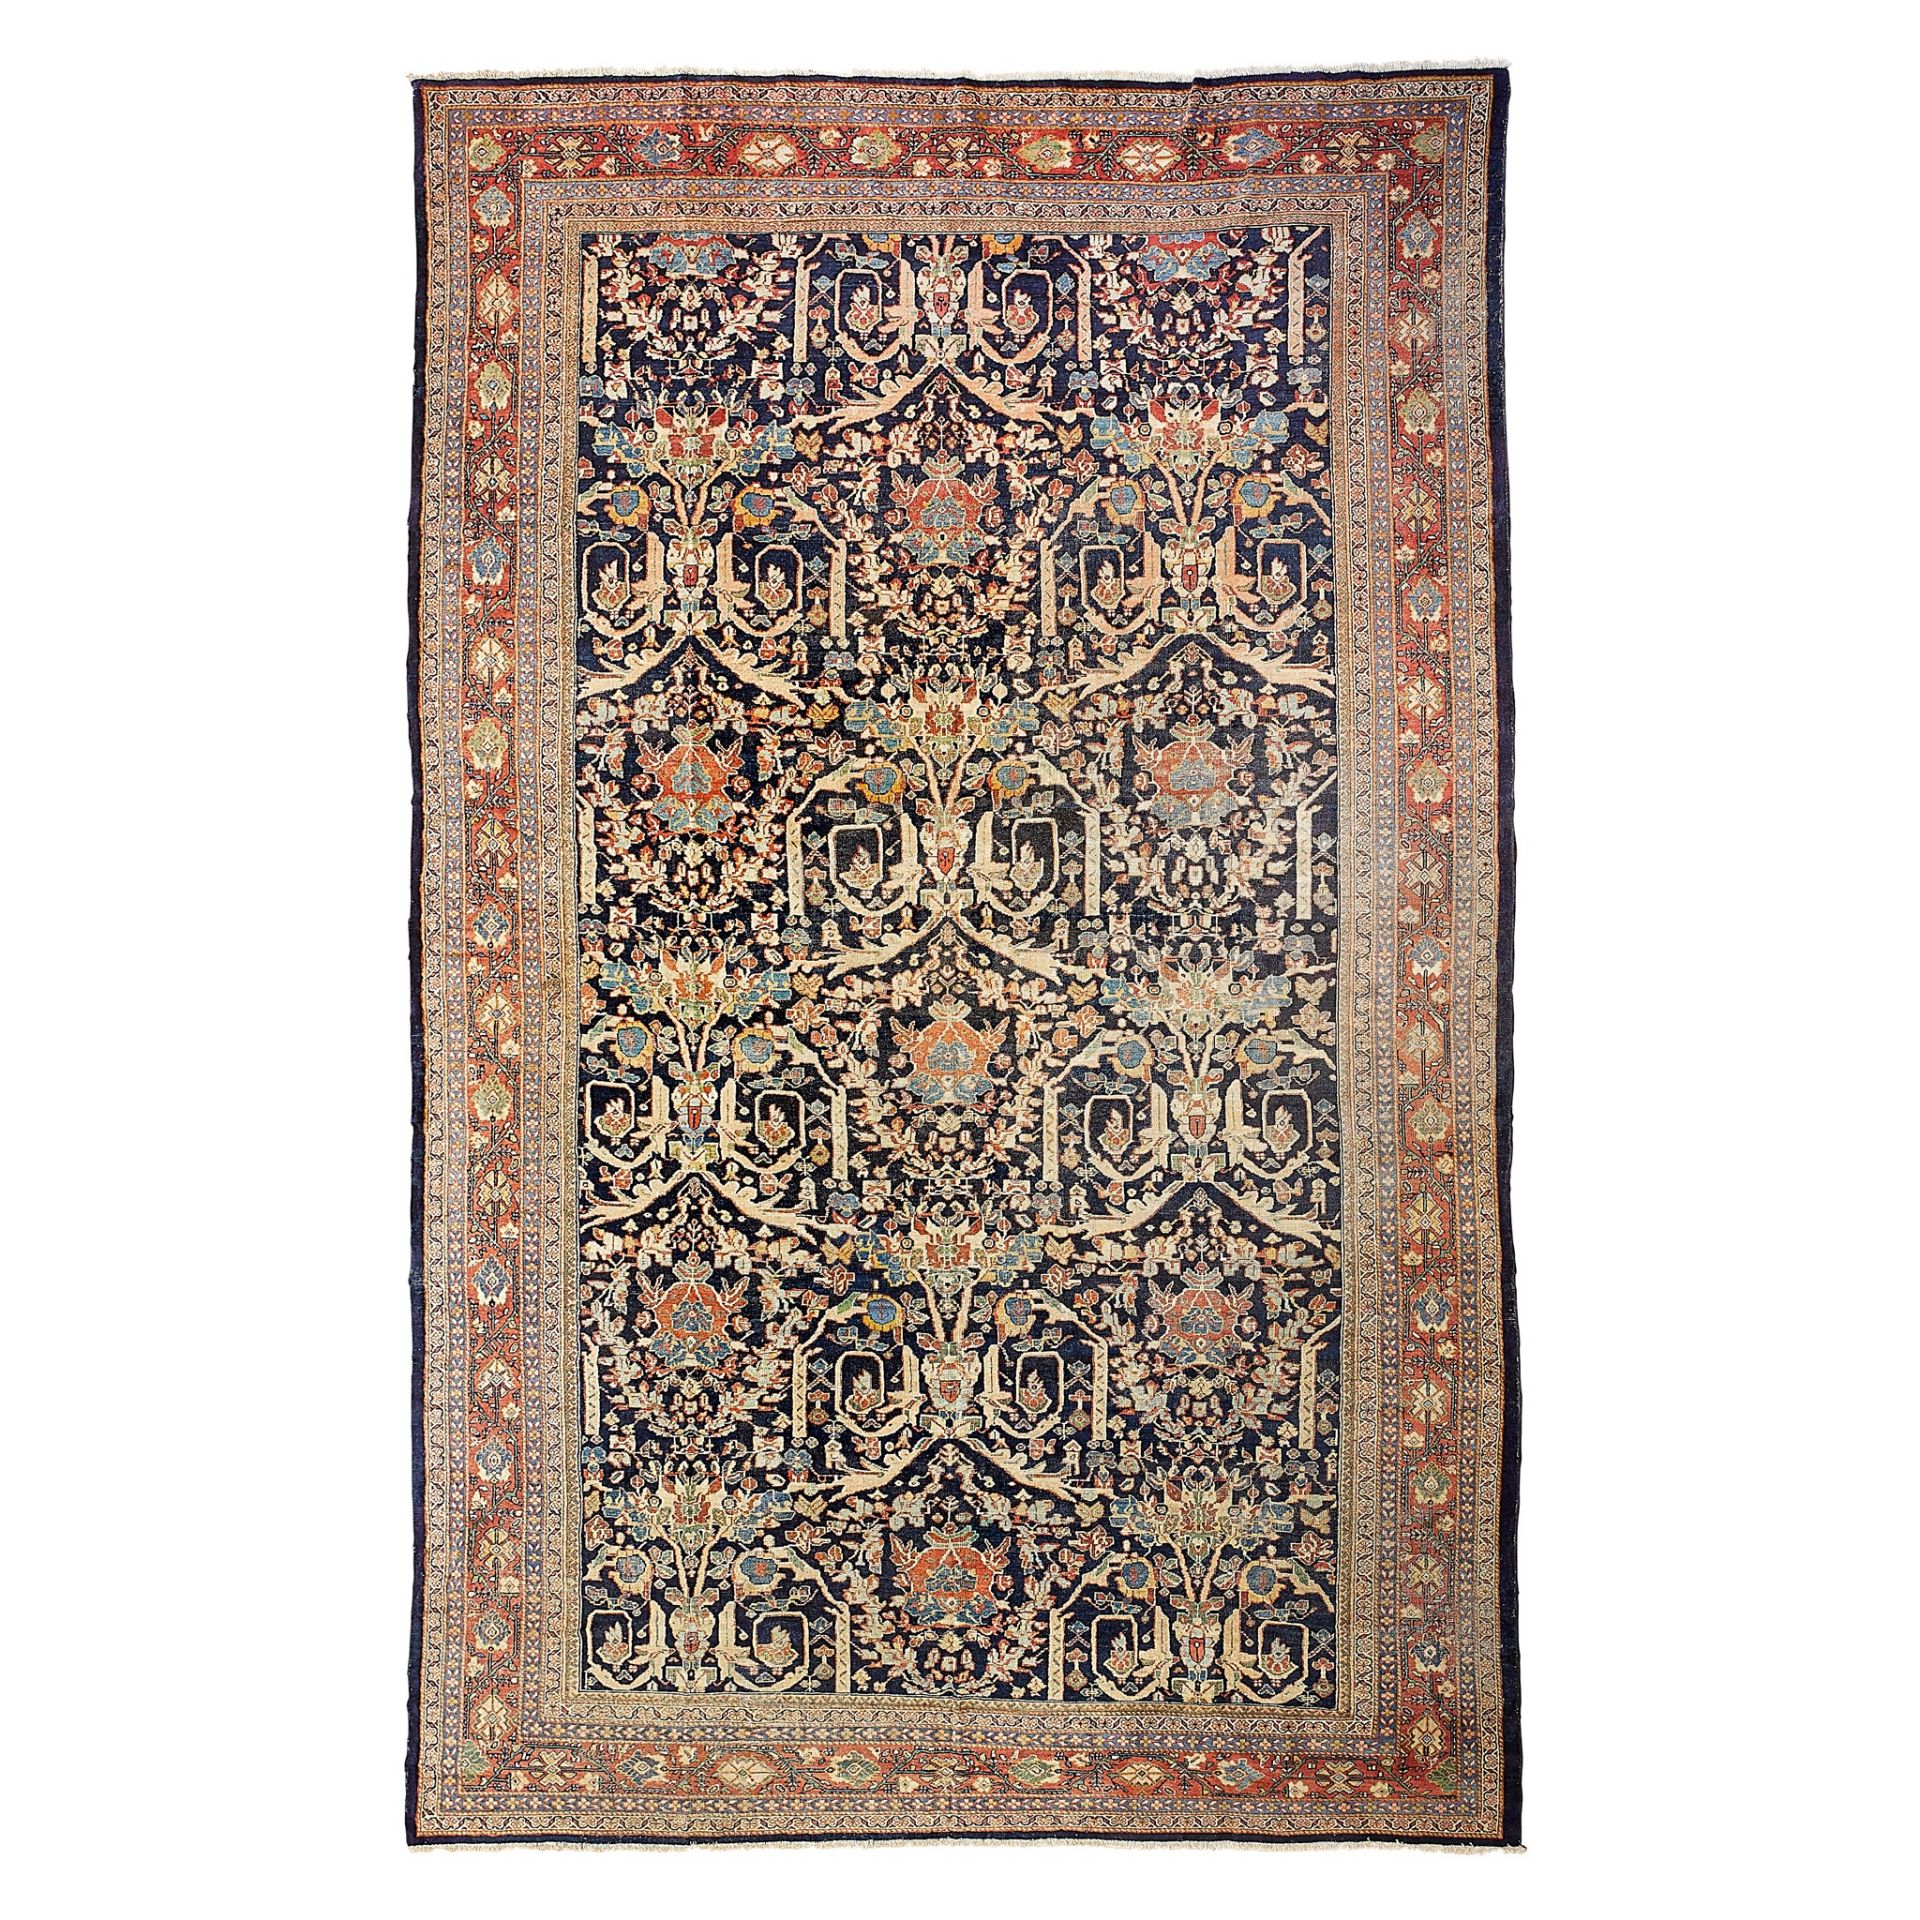 LARGE SULTANABAD CARPET WEST PERSIA, LATE 19TH CENTURY